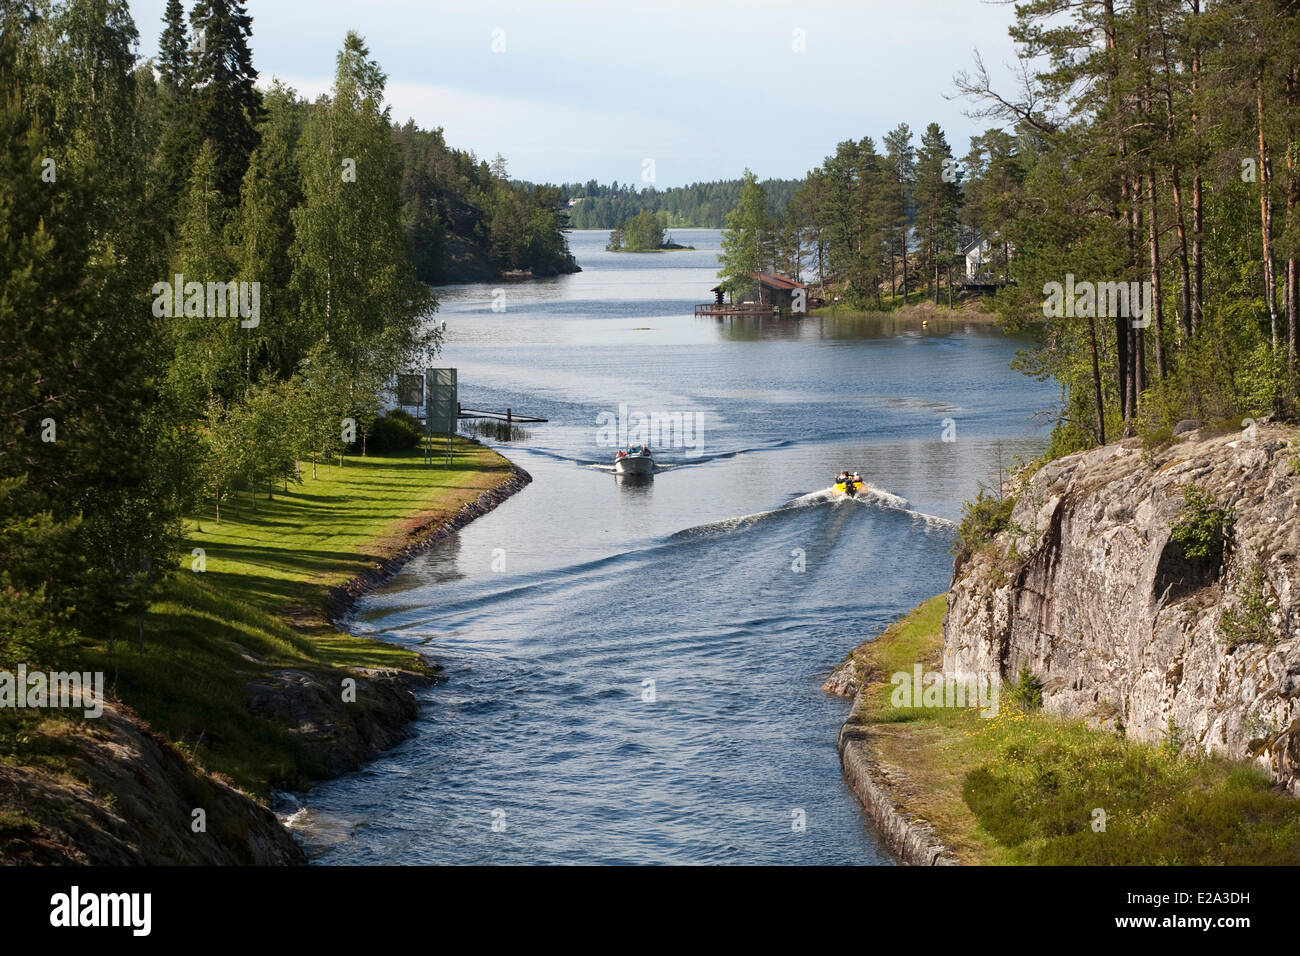 Finland, Southern Savonia, Ristiina, Navigation on the Varkaantaipale canal Stock Photo